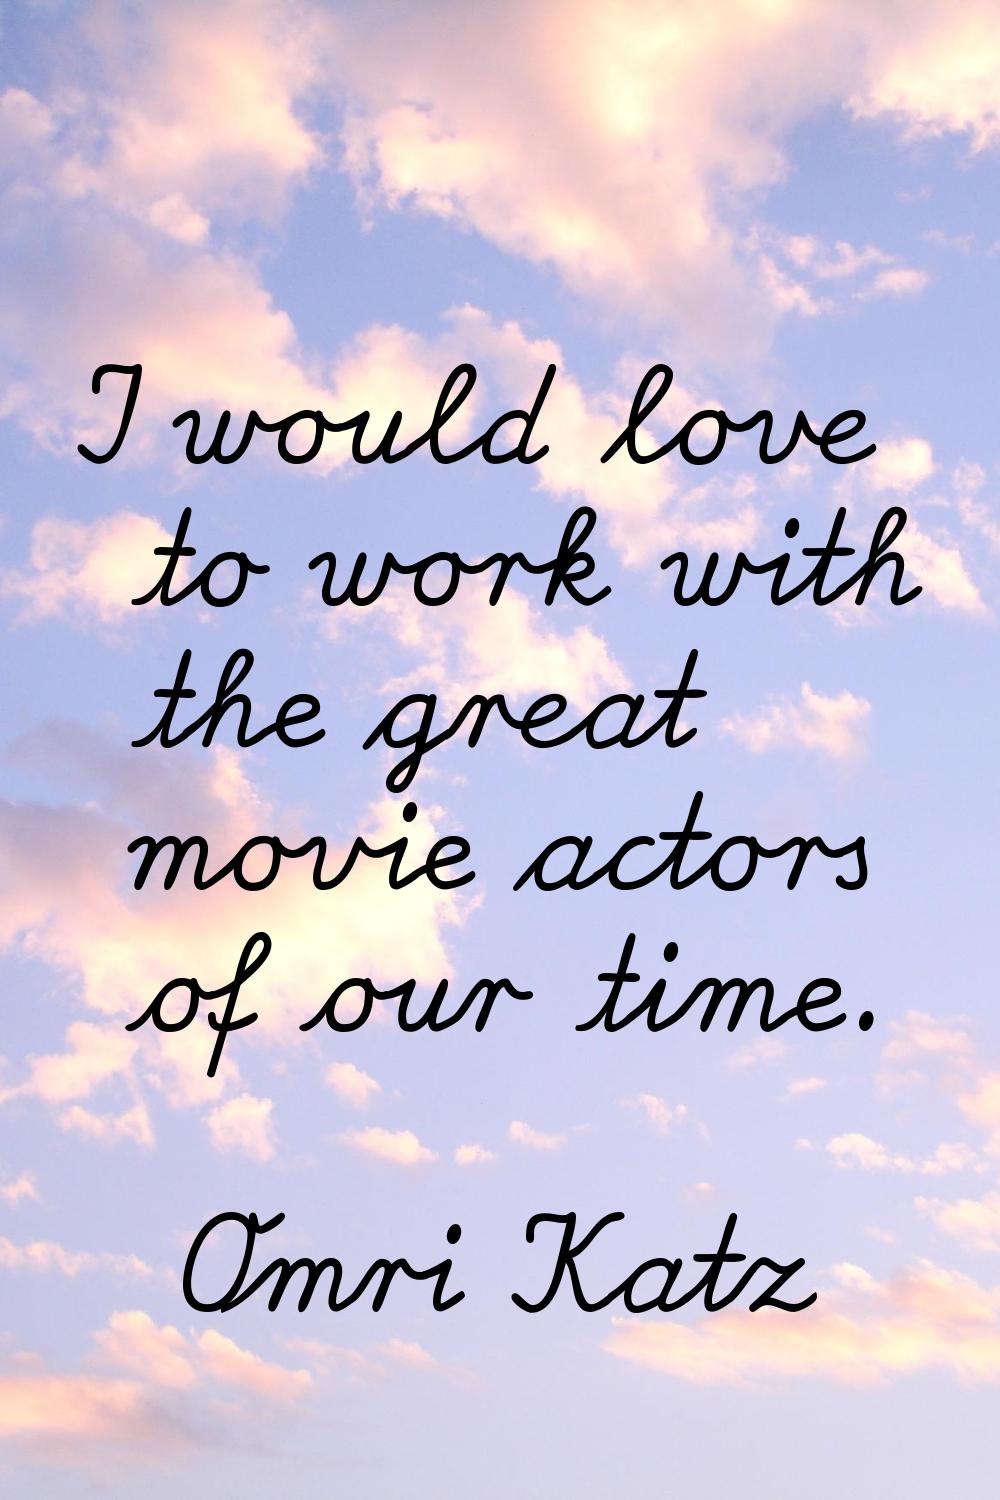 I would love to work with the great movie actors of our time.